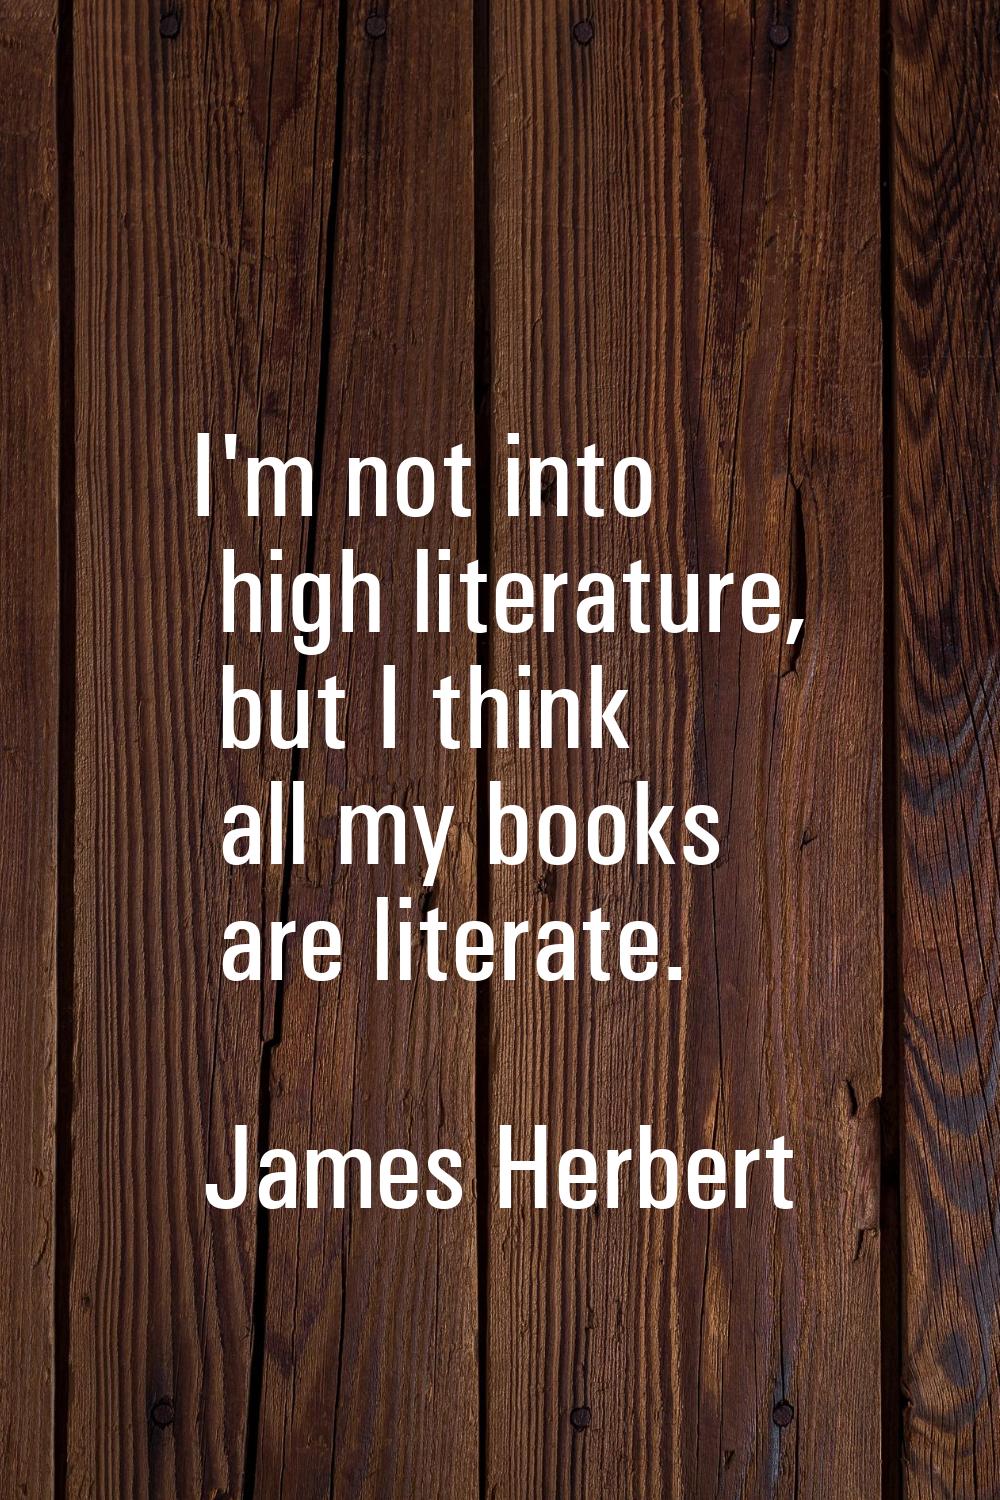 I'm not into high literature, but I think all my books are literate.